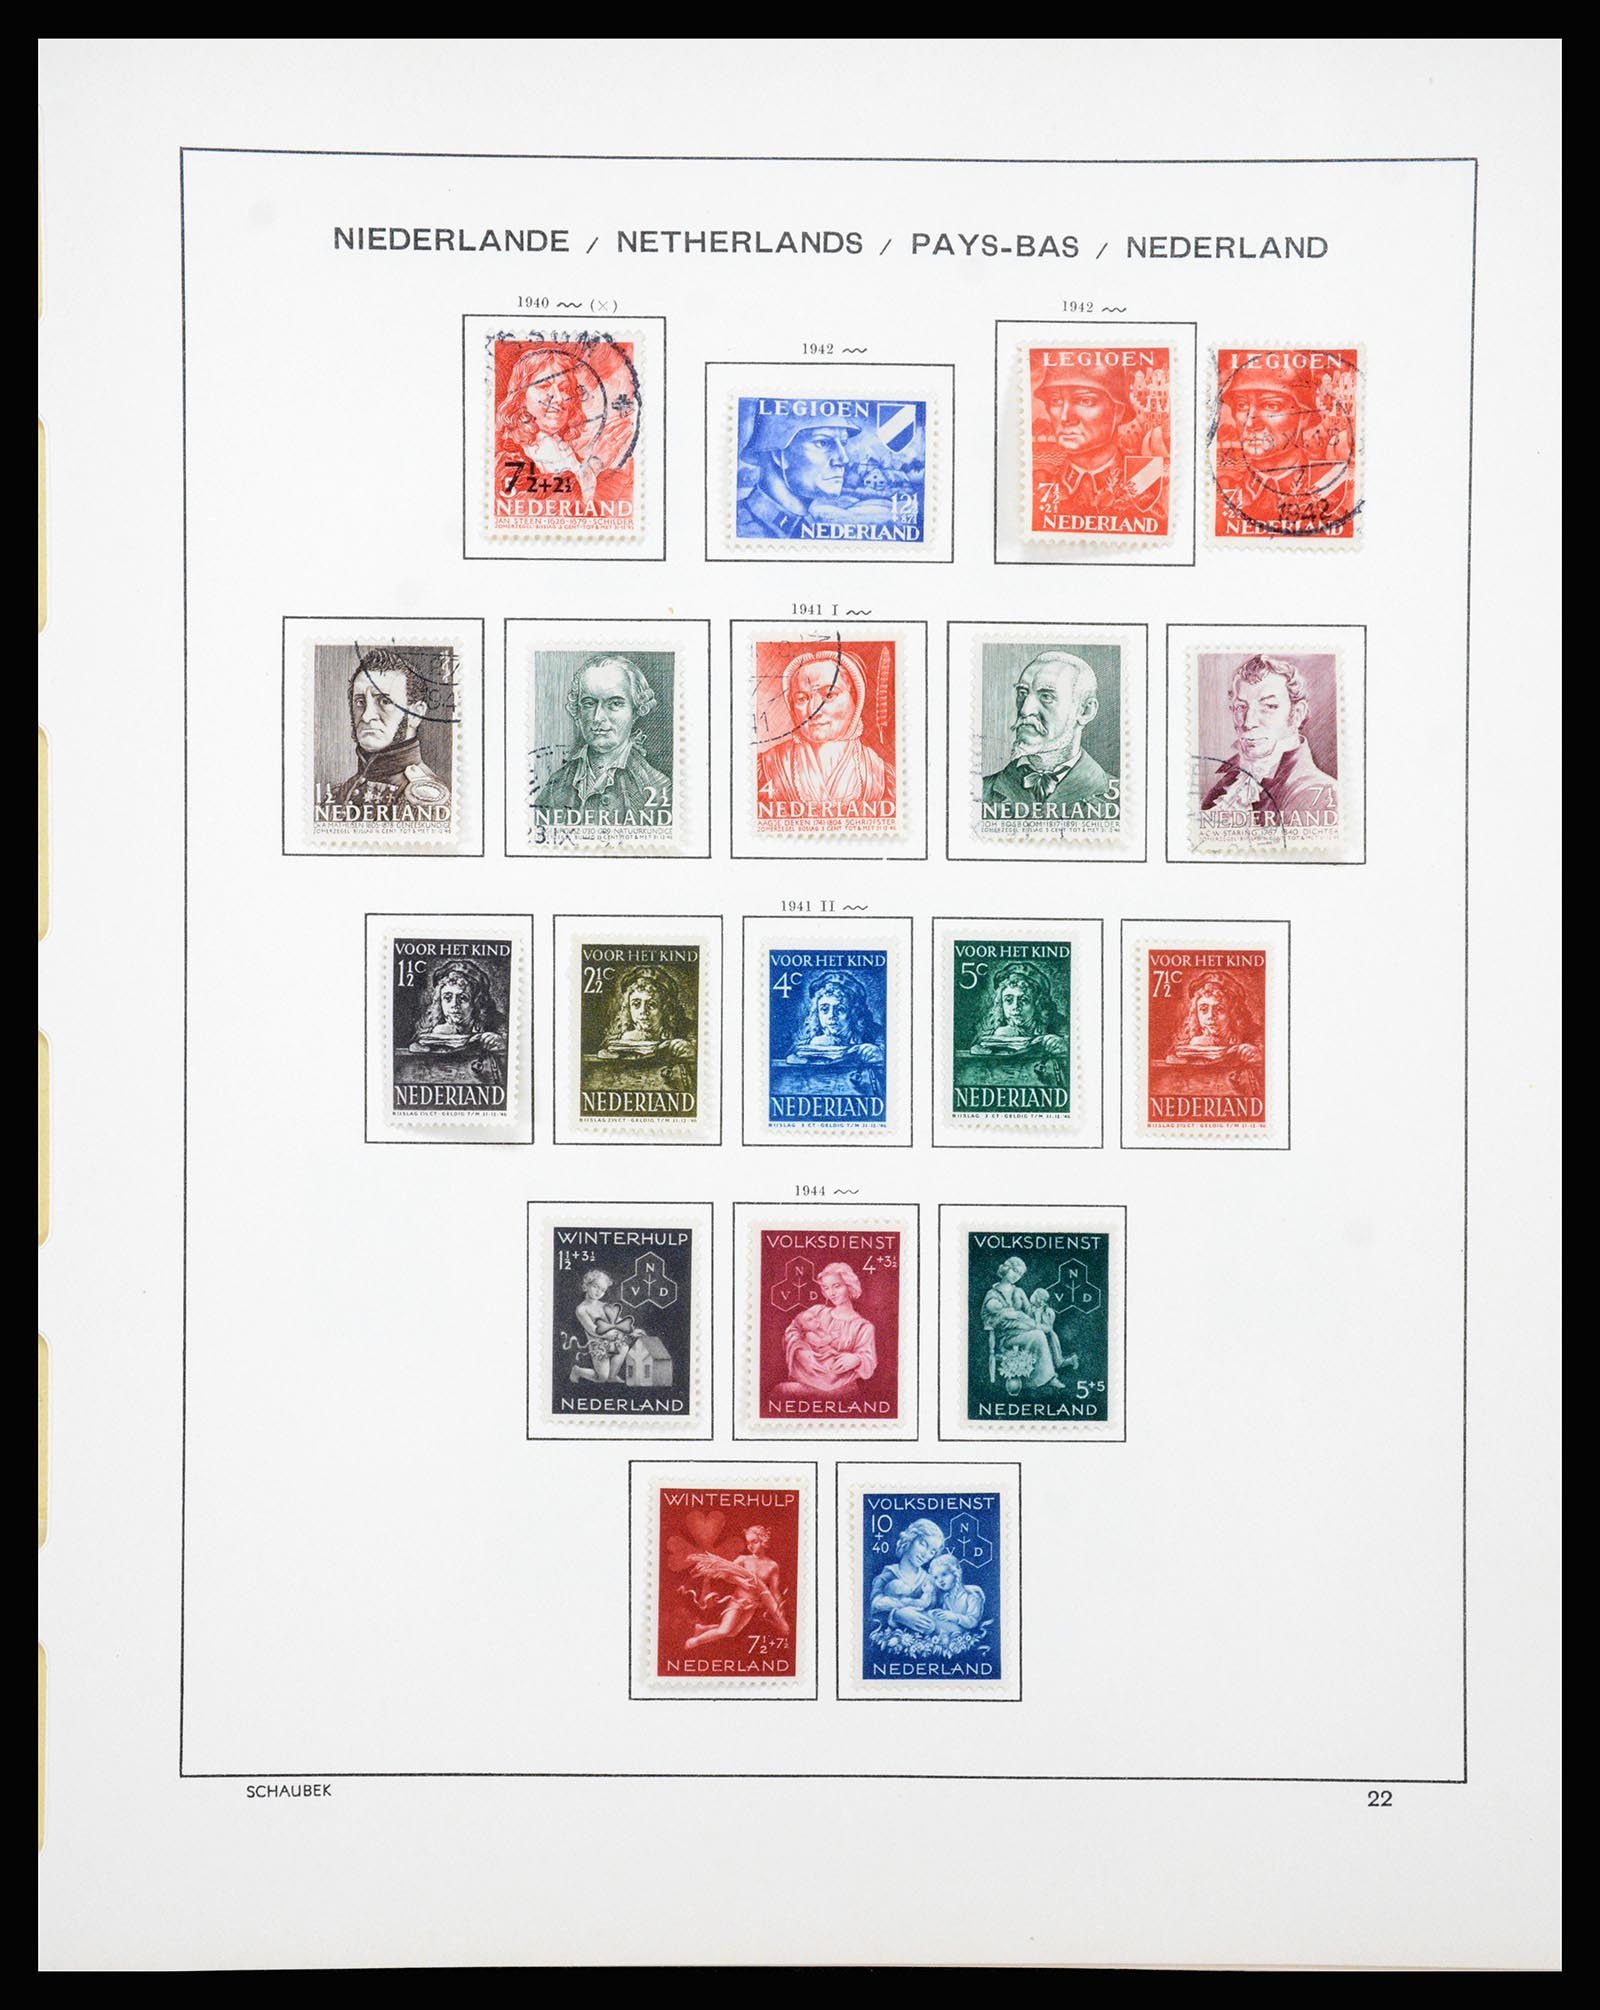 37237 022 - Stamp collection 37237 Netherlands 1852-1944.